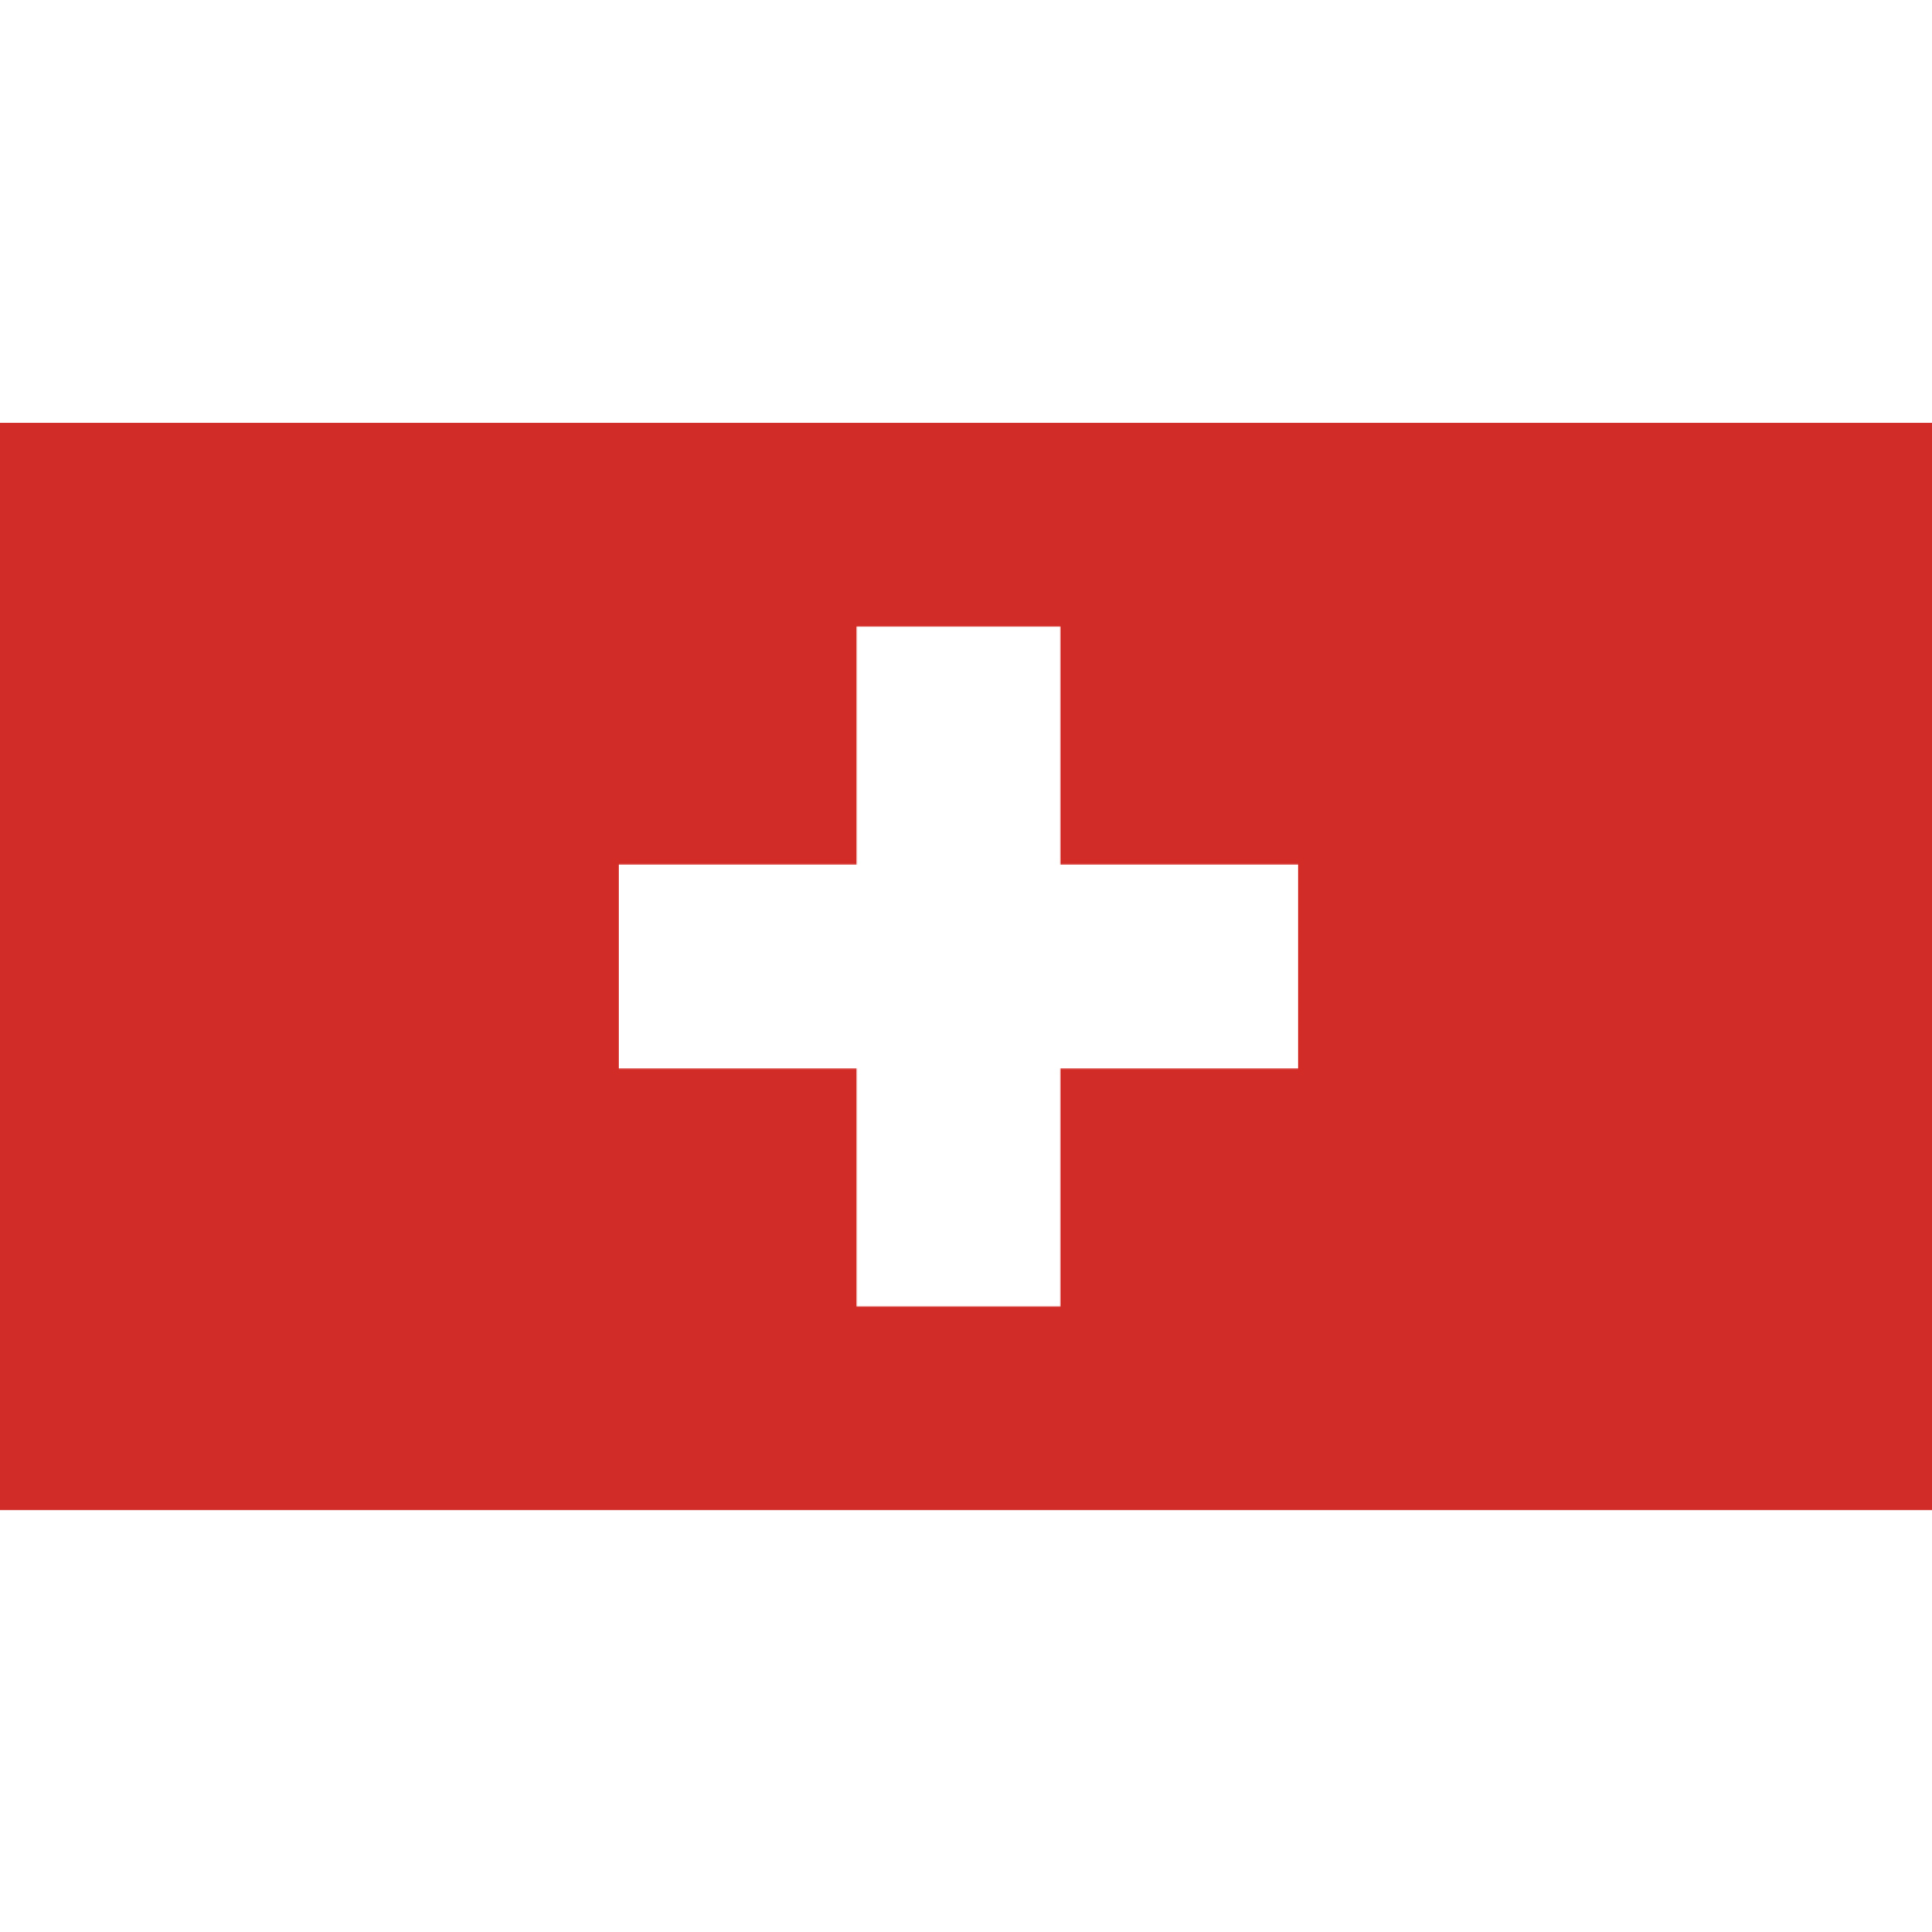 The flag of Switzerland consists of a red background with a white cross in the centre.